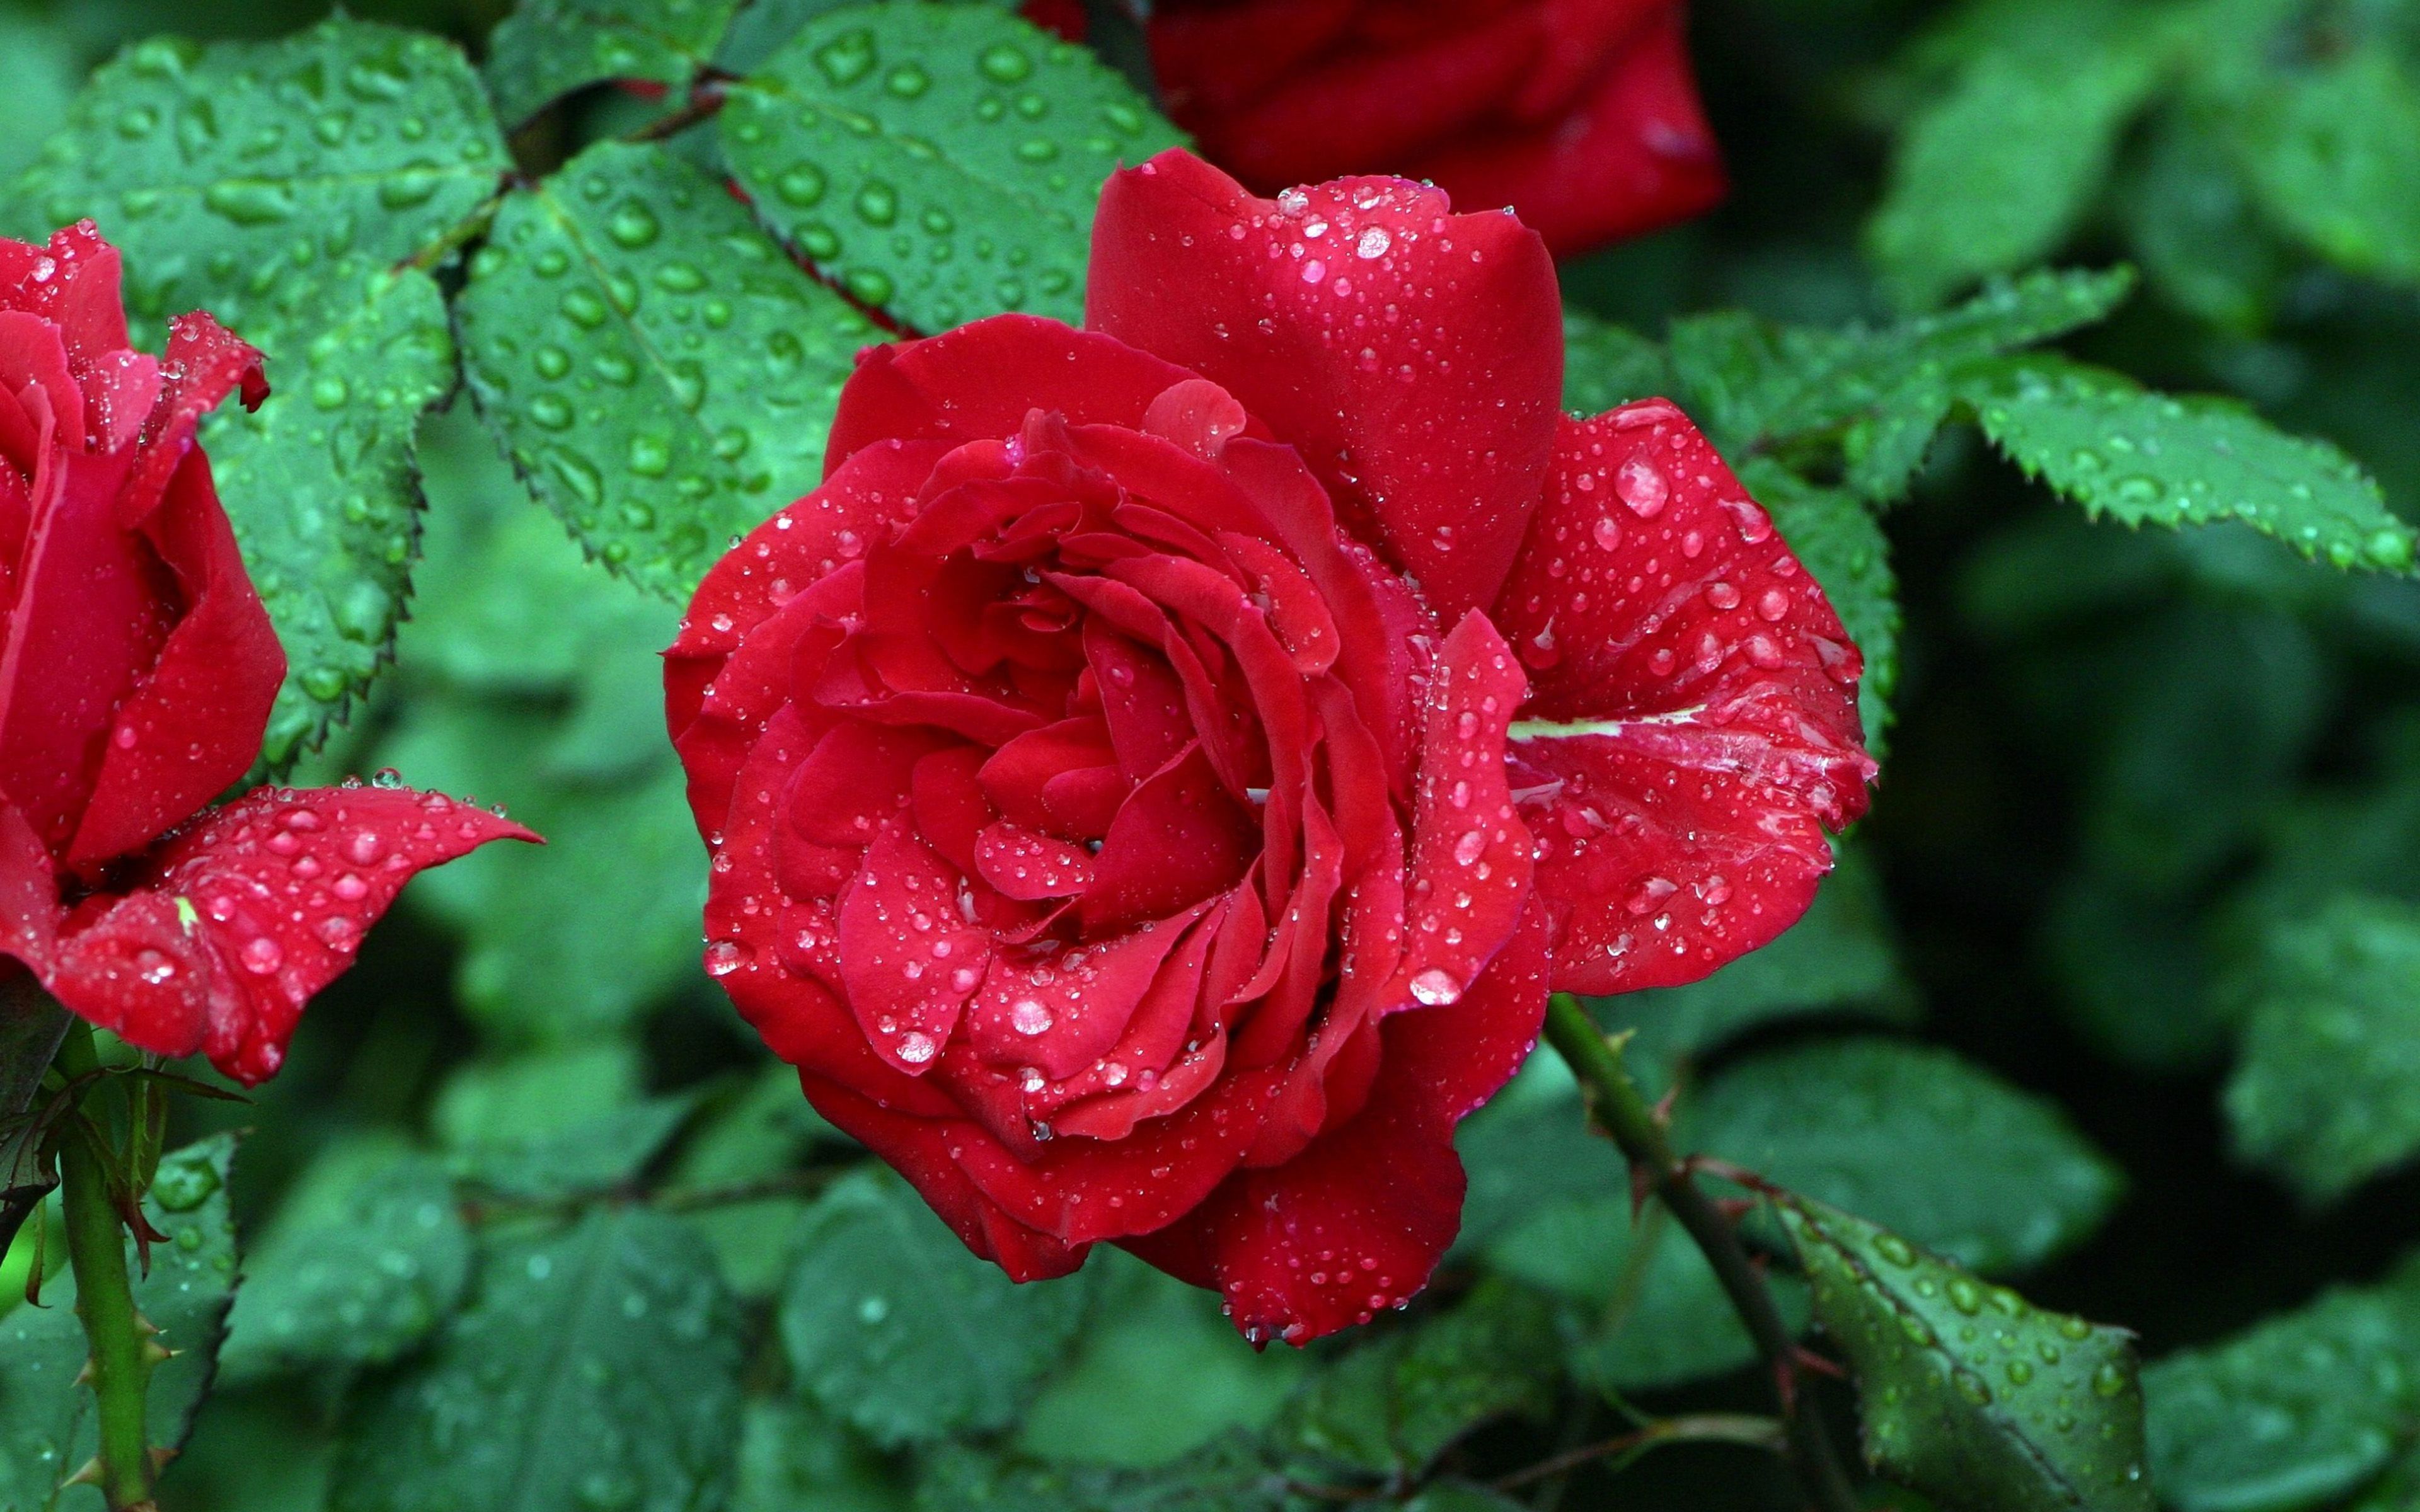 Lovely Rose With Beautiful Red Color Petals Drops Water Green Leaves 4k Ultra HD Wallpaper For Desktop Laptop And Tv Tablet Mobile Phones3840x2400, Wallpaper13.com